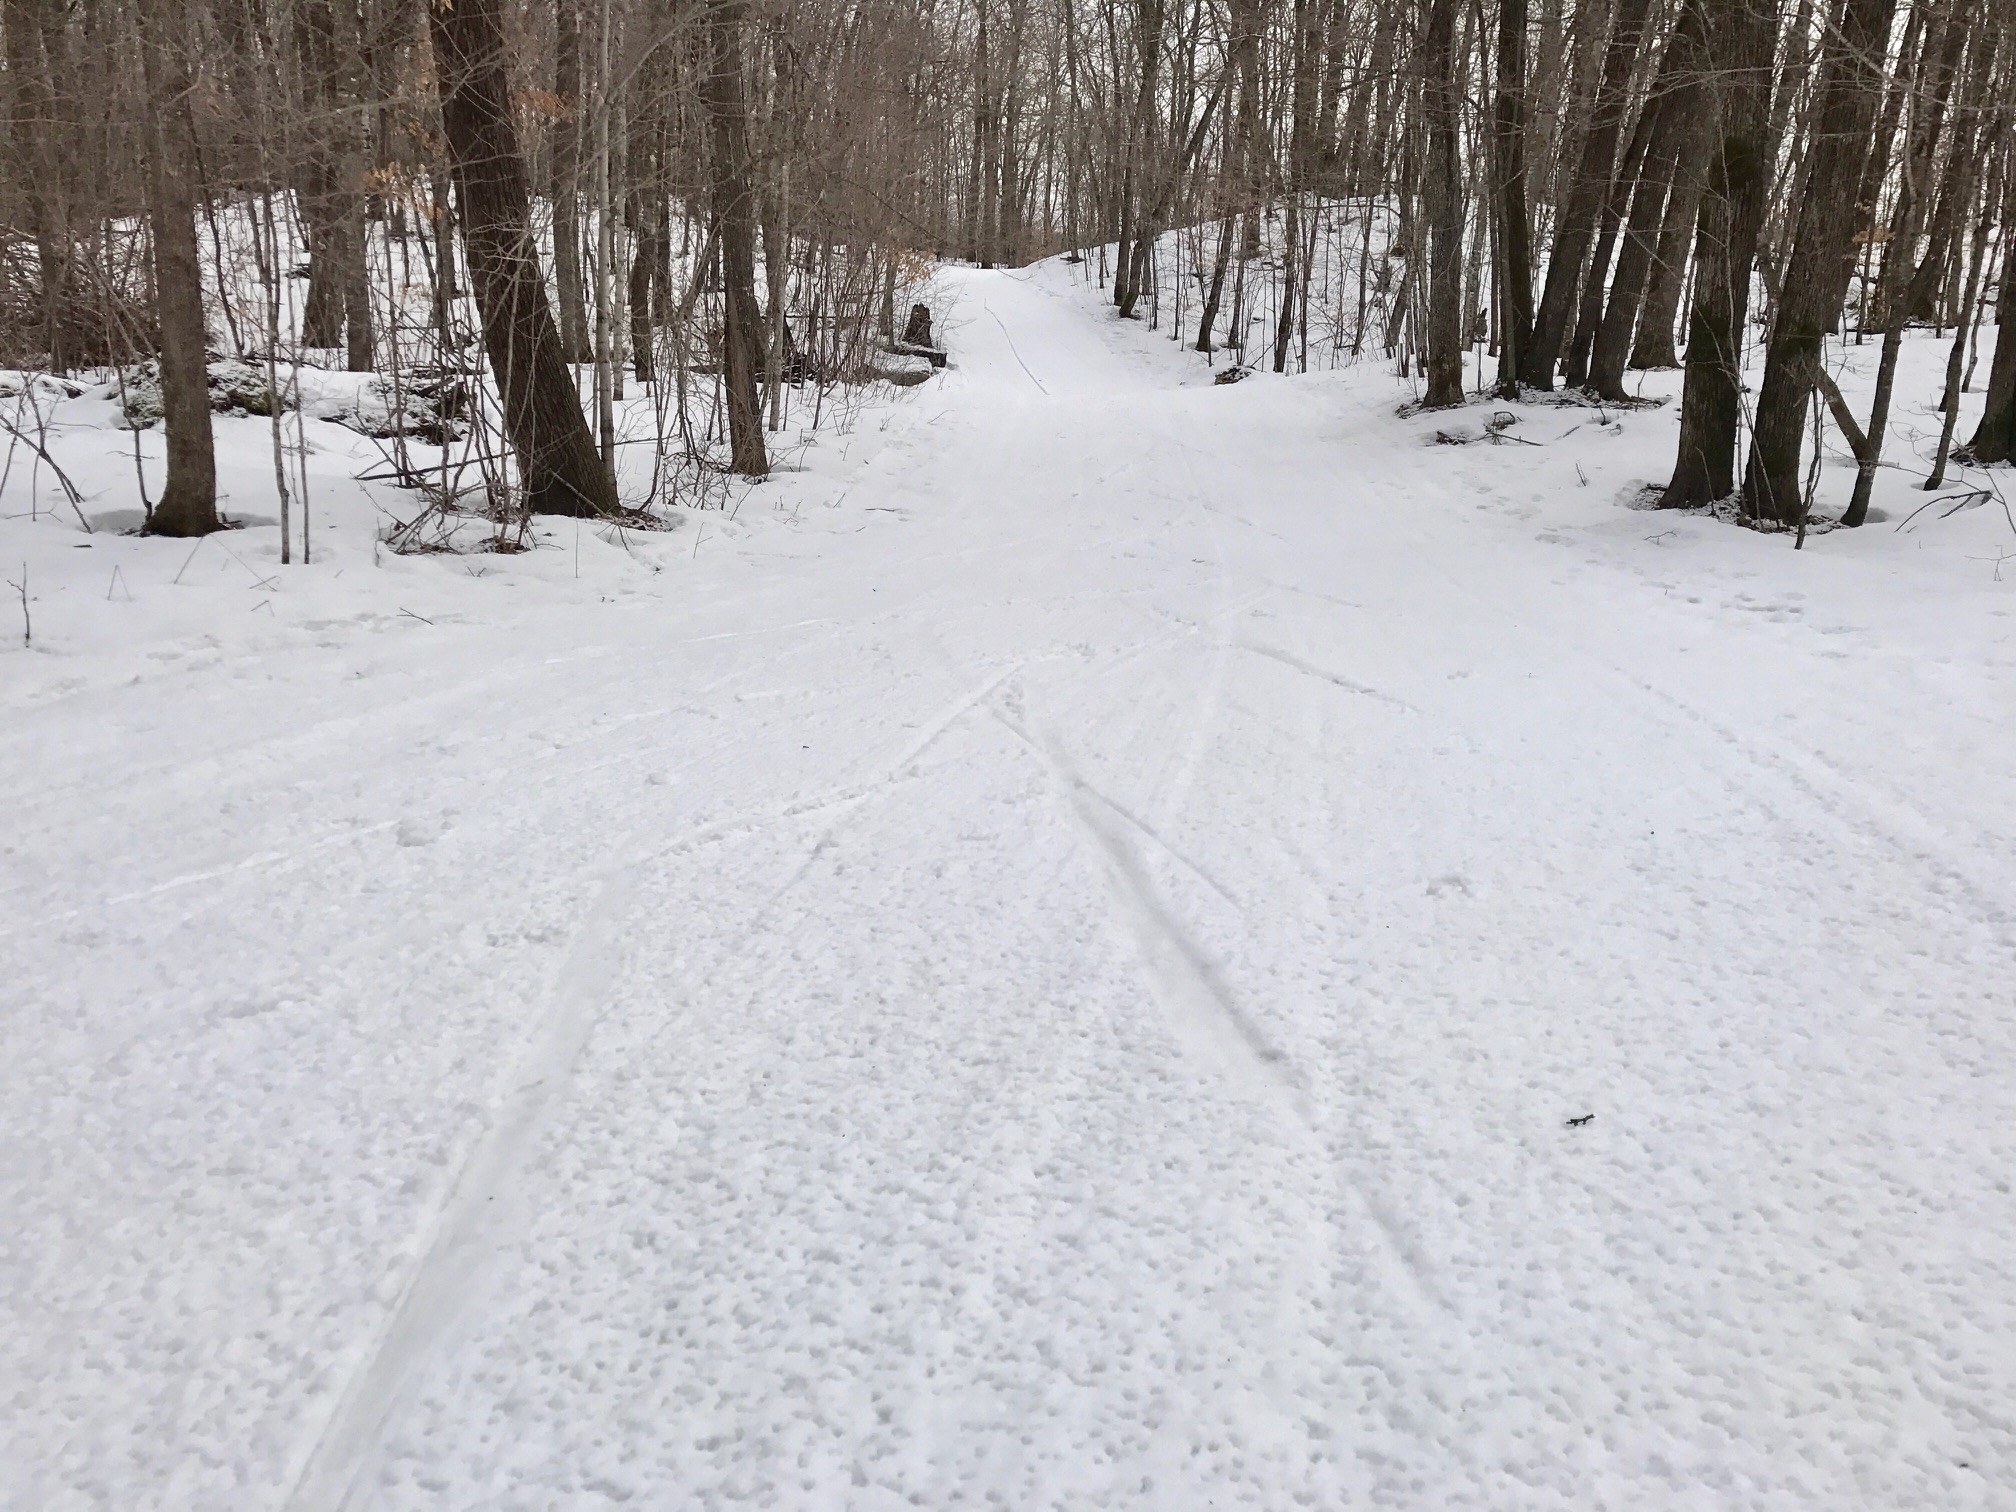 Skaters Waltz Thursday morning, February 23rd, 2017. Skaters and other skate trails will be groomed today. Conditions will be fast but good structure for edging and some of the best skiing of the year! Use caution on the Kamikaze hill section. Icy spots. Rest of look excellent coverage.